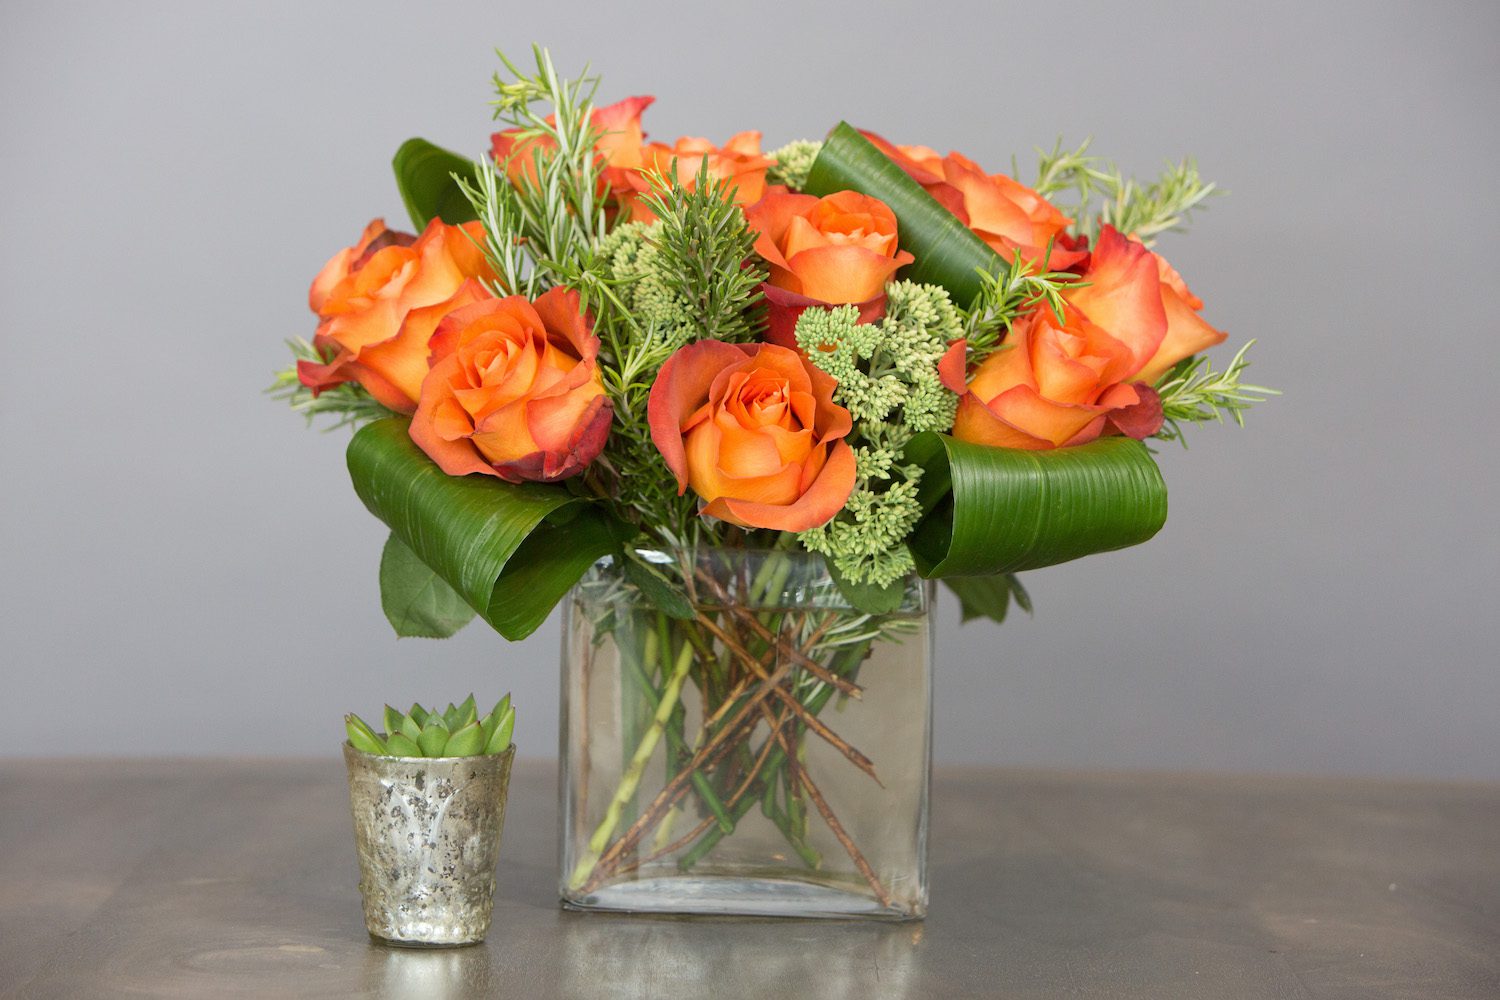 This "modern dozen" with burnt orange Roses is paired with a succulent in a small votive vase, sold separately.